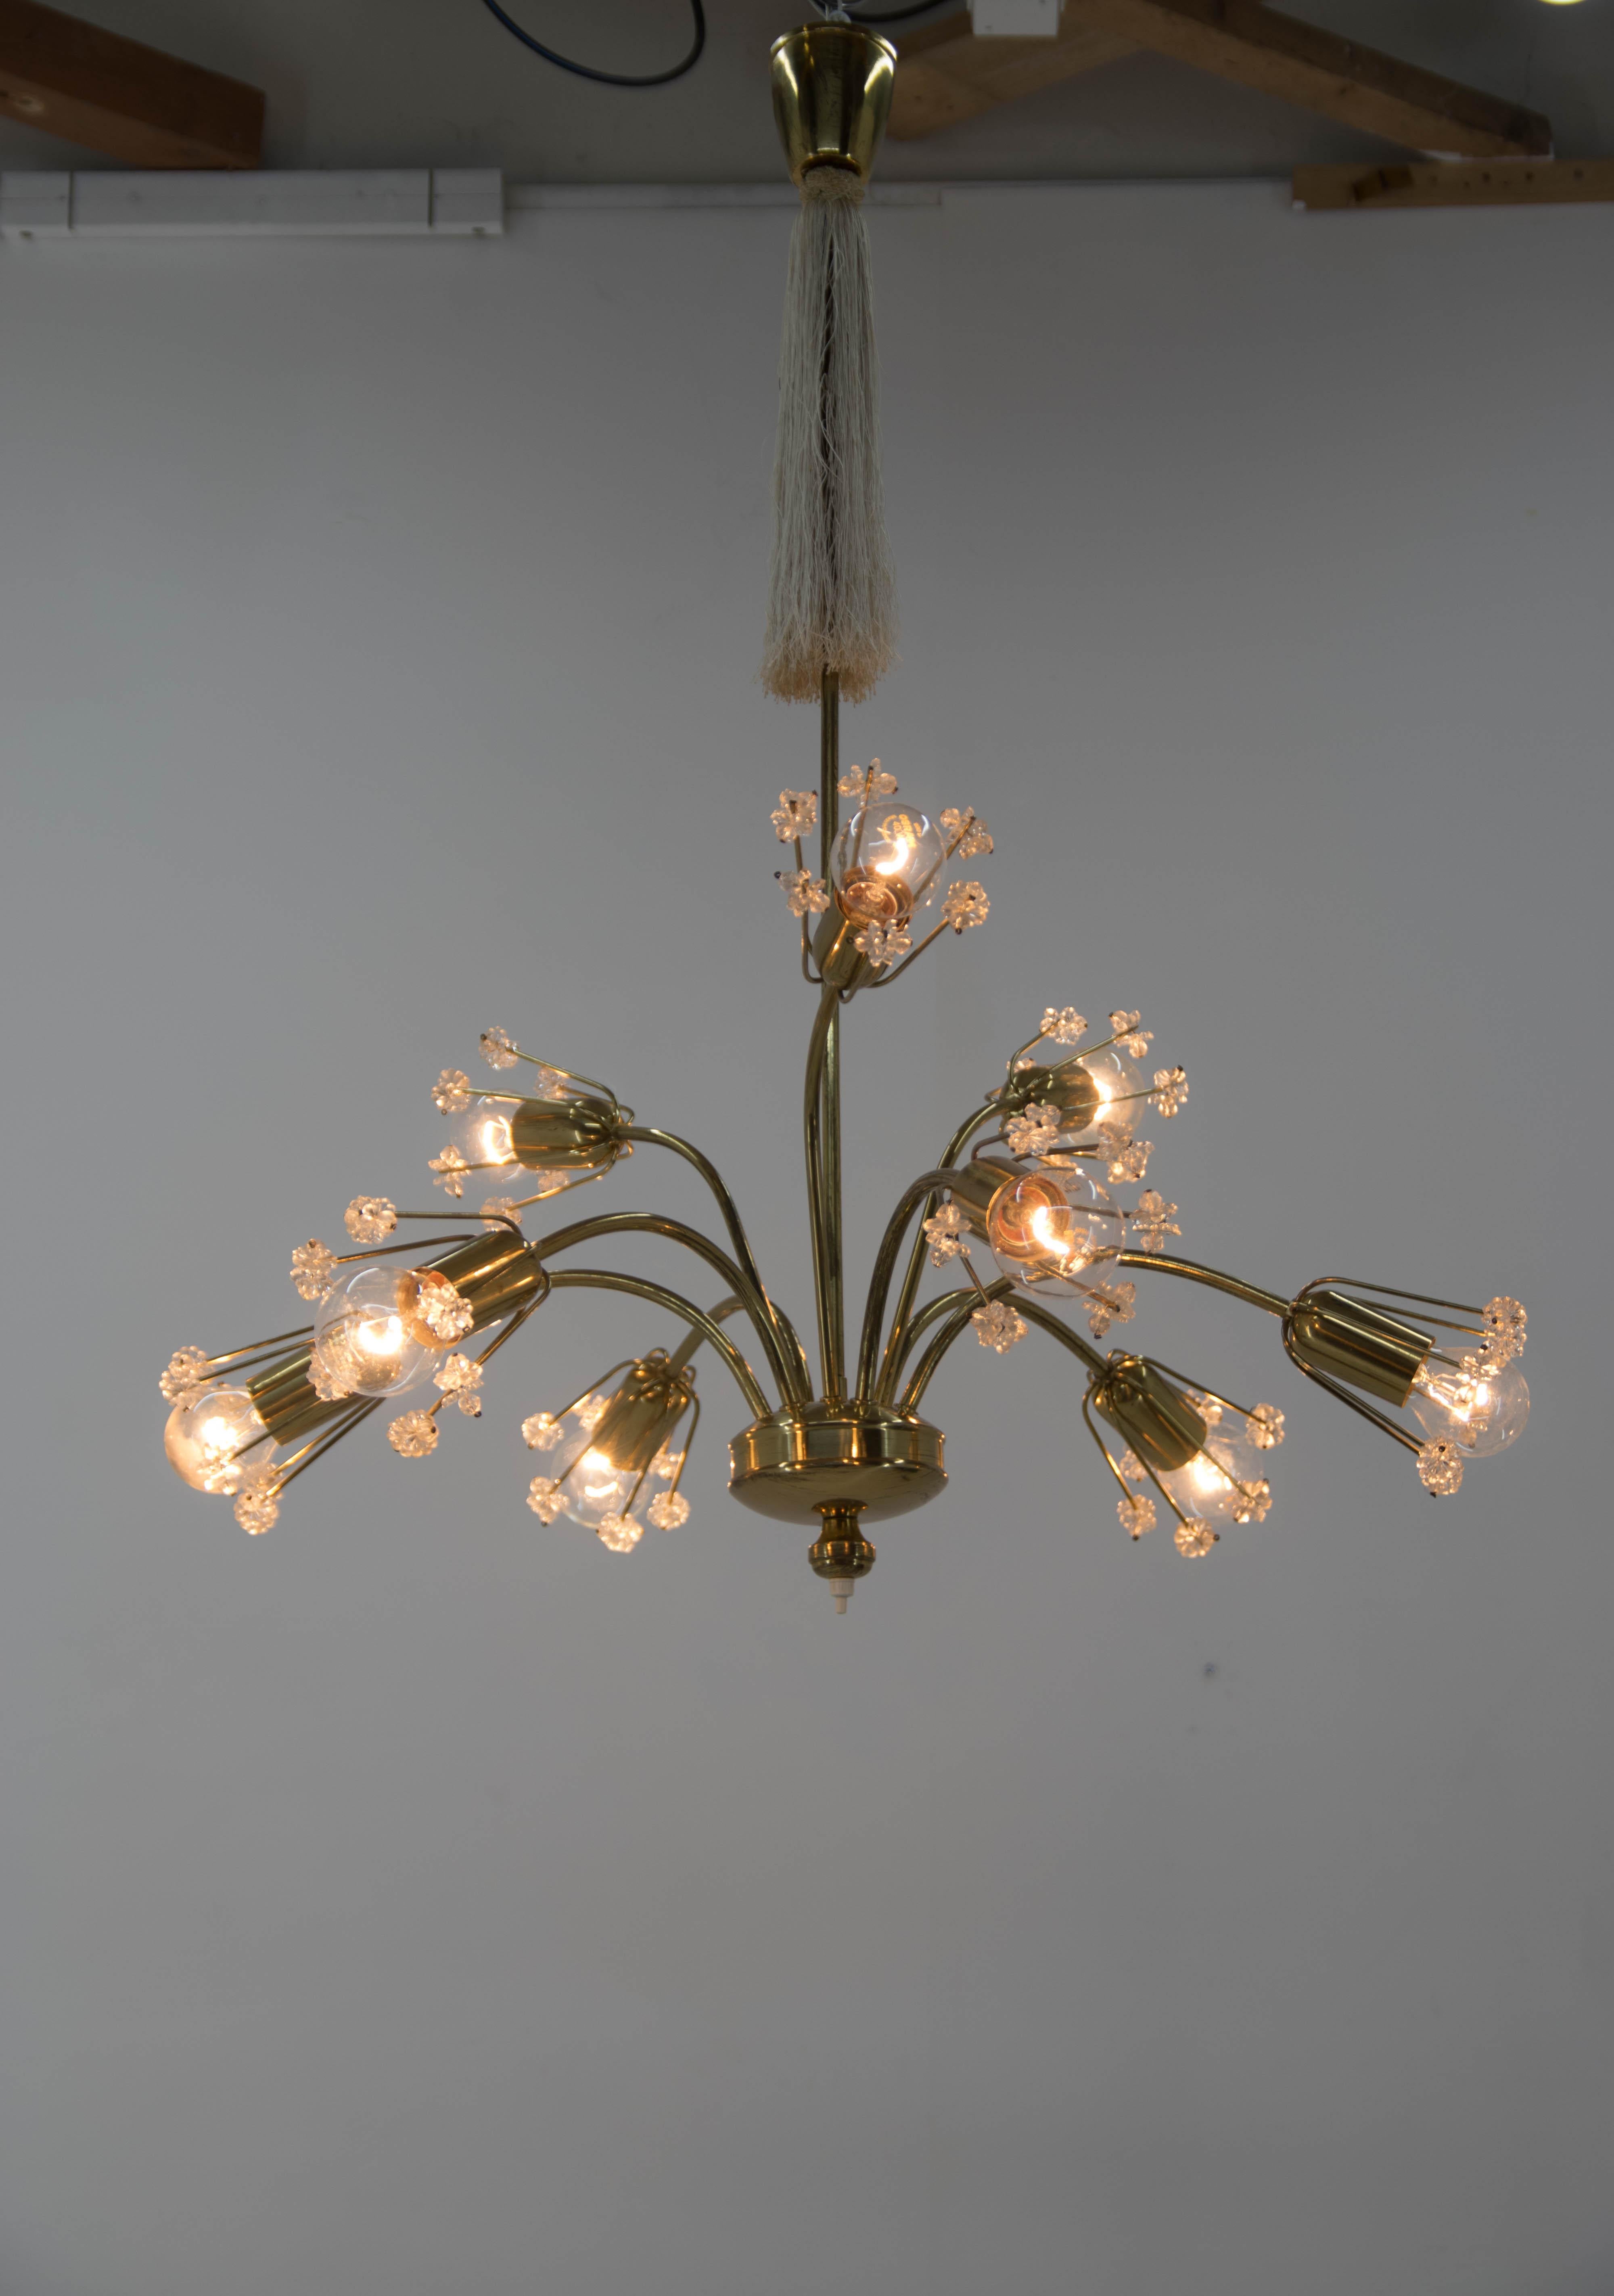 Designed in 1950s by Emil Stejnar and executed by Rupert Nikoll. Switch on the bottom part could turn off upper three bulbs. Lacquered brass with minor age patina. No crystal parts missing. 
9x40W, E12-E14 bulbs.